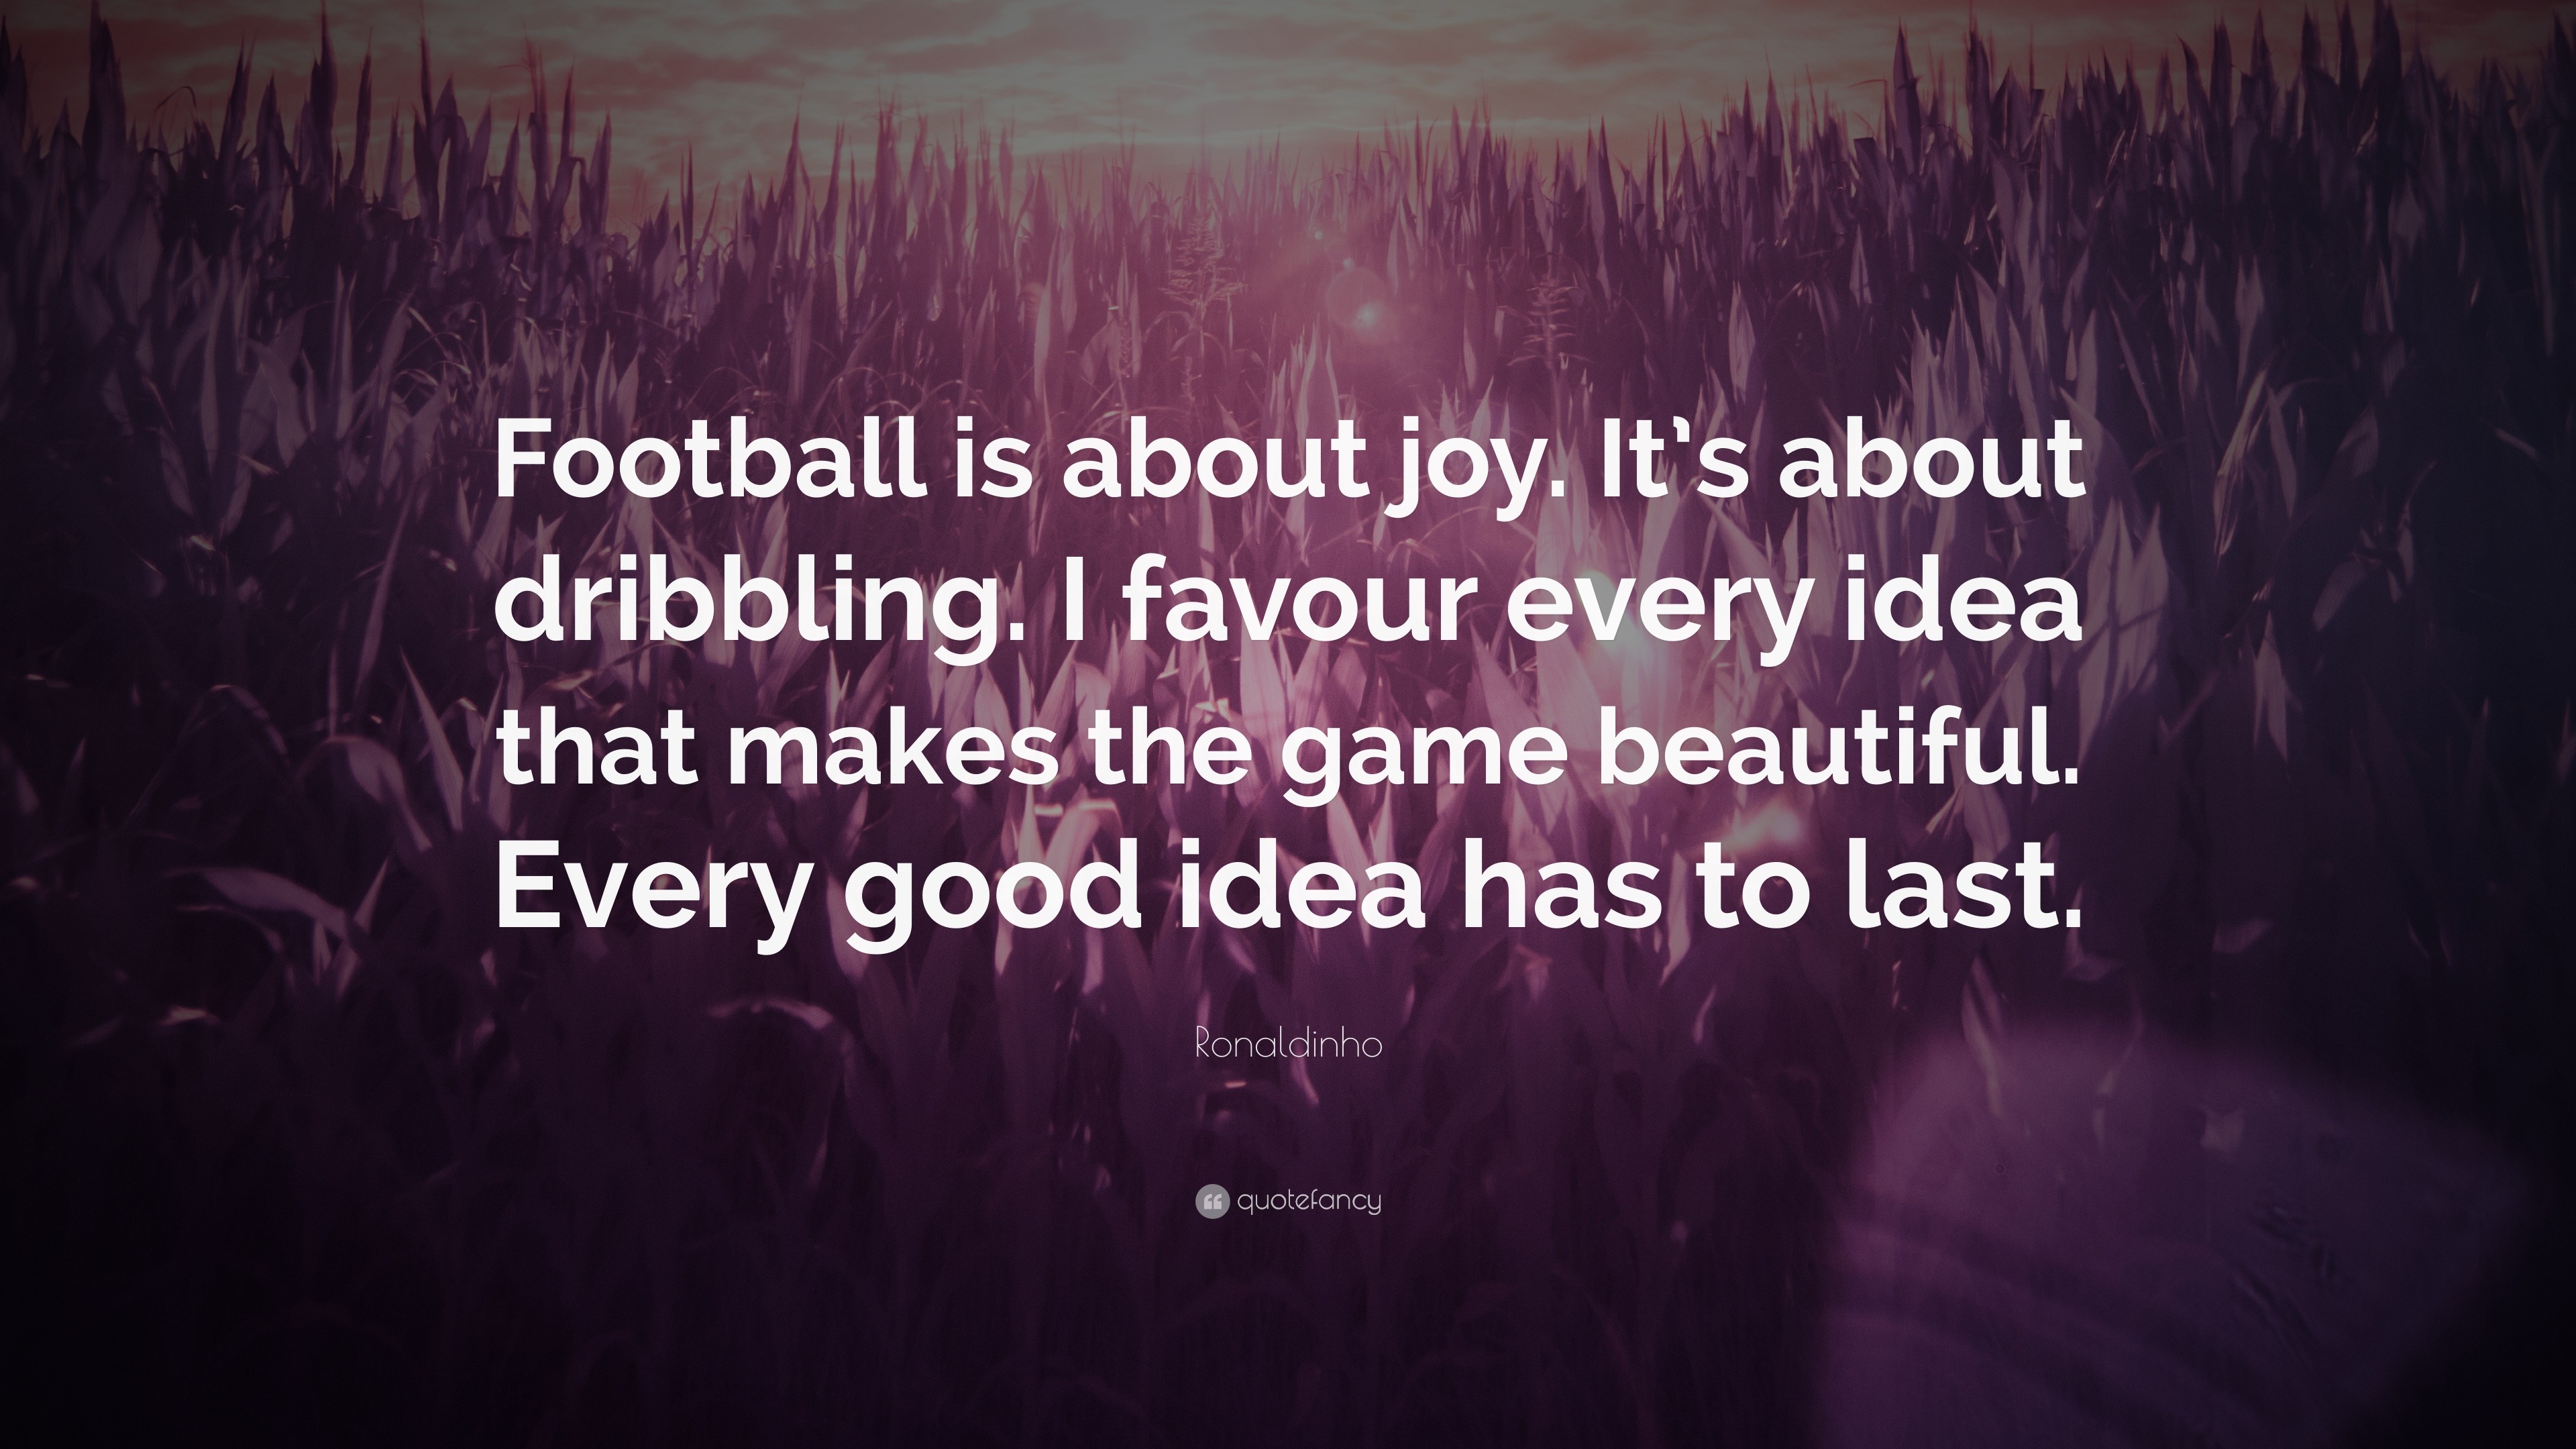 Ronaldinho Quote: “Football is about joy. It’s about dribbling. I ...